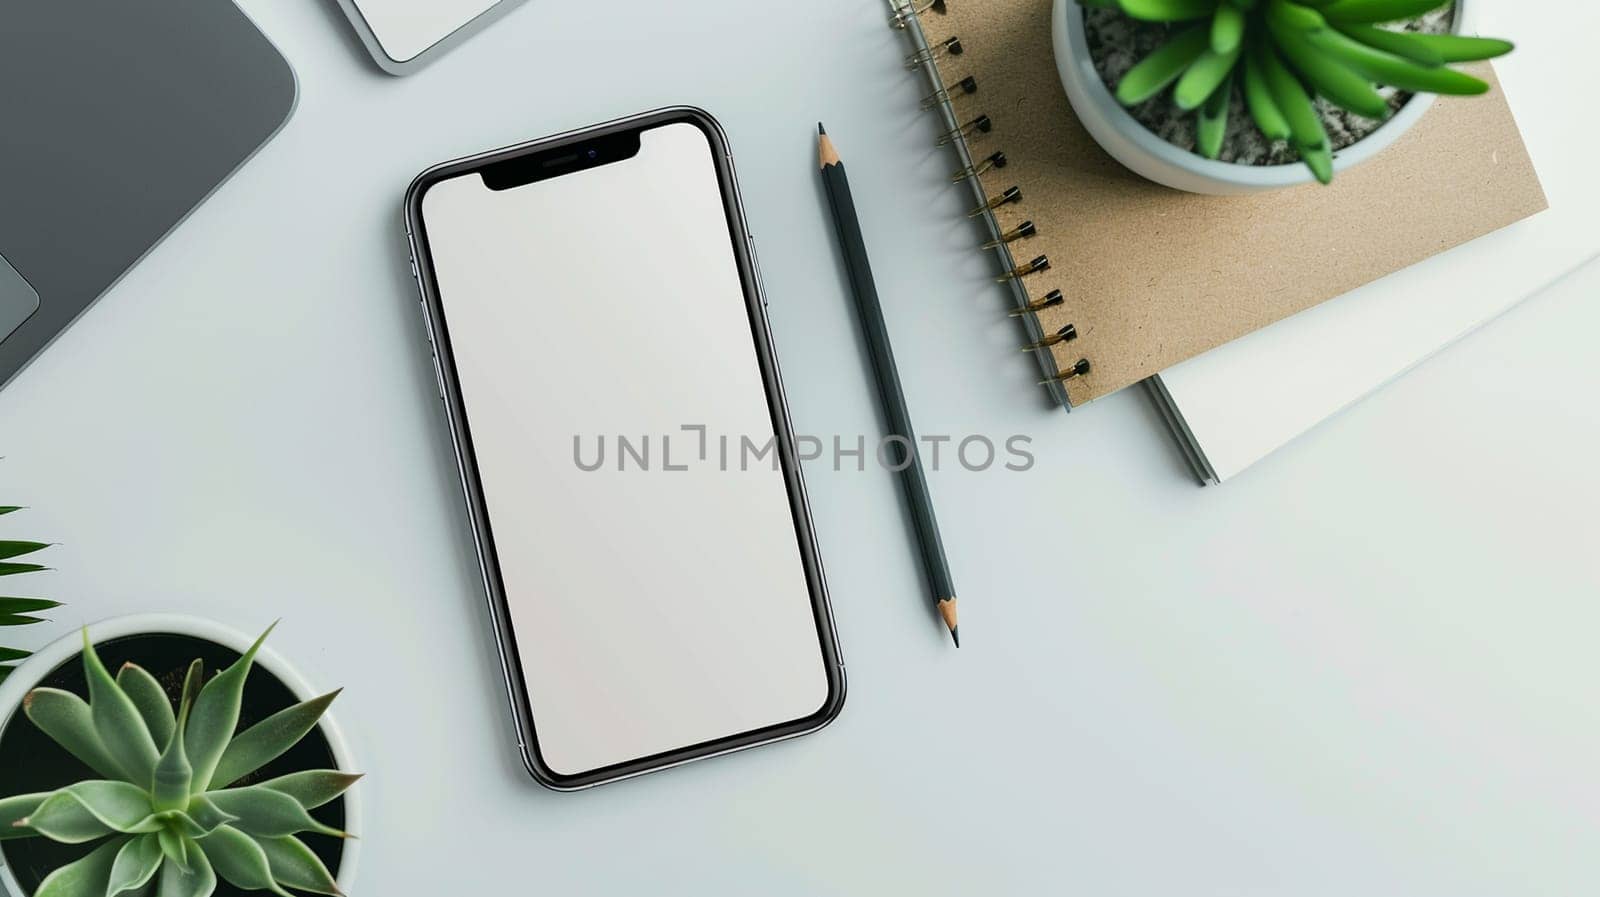 Minimalist workspace with smartphone mockup, potted plant, notebook, and pencil on bright desk surface for productivity and organization concepts.